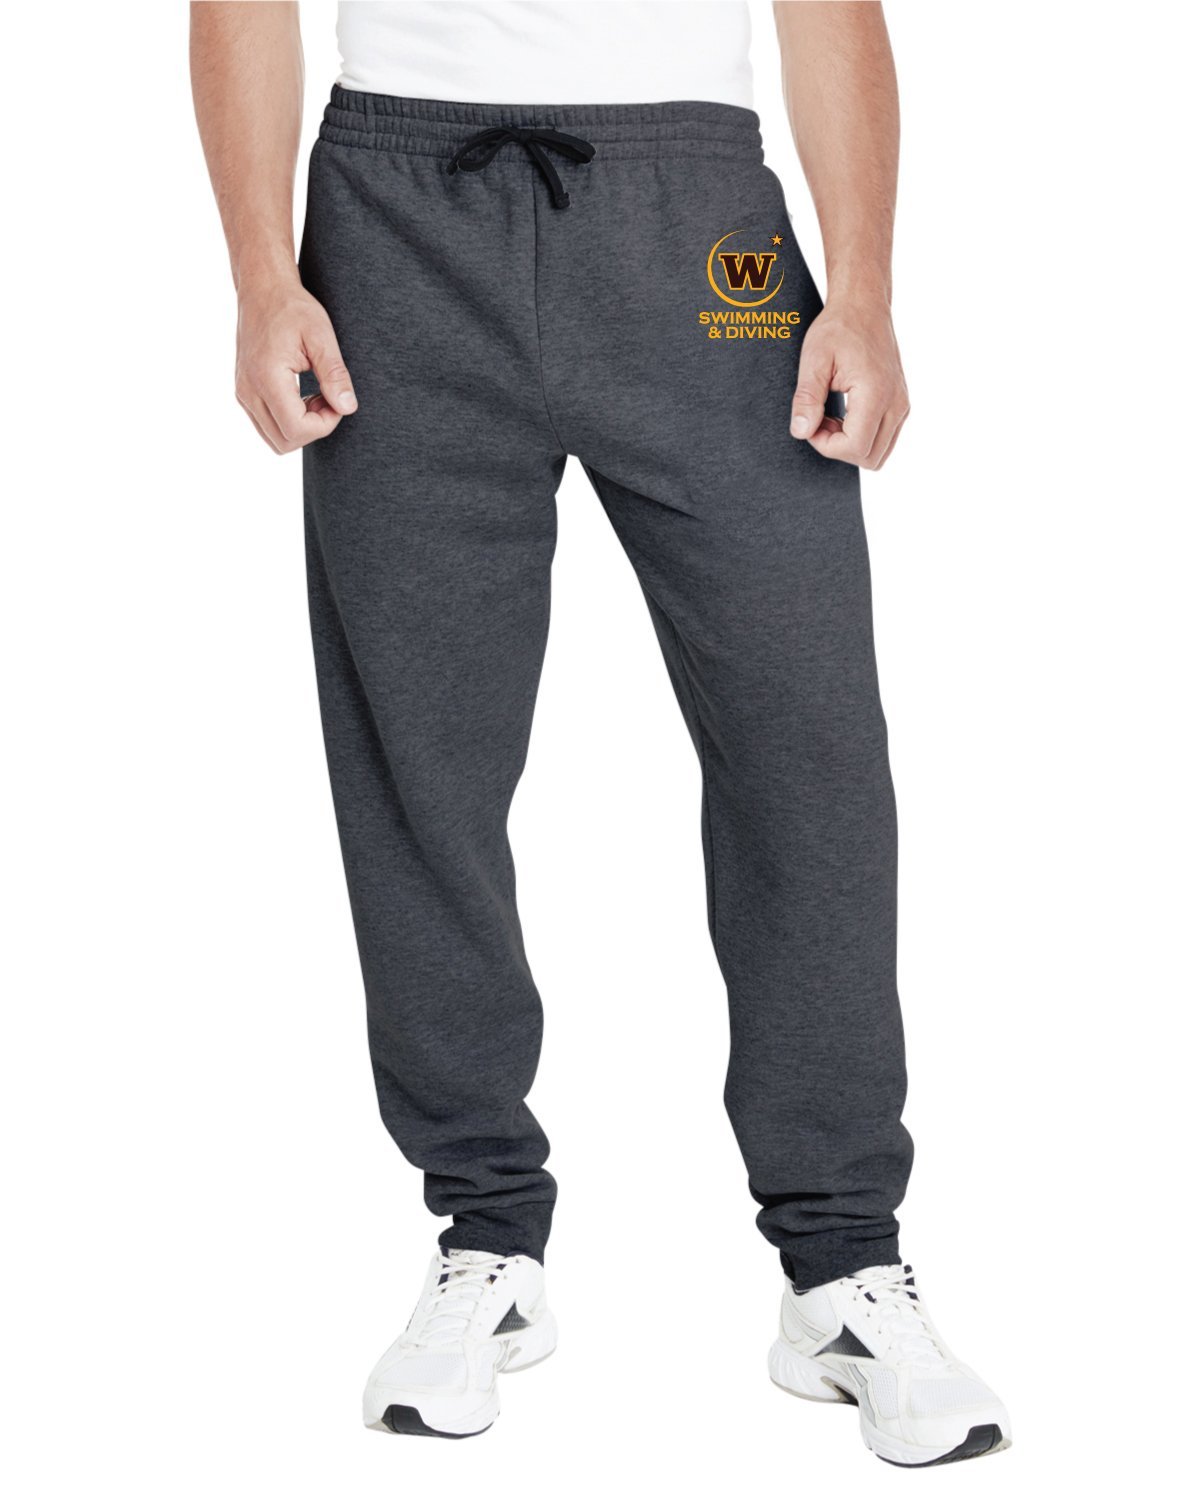 WHS Girls Swimming and Diving Adult Sweatpants | K&W Printing